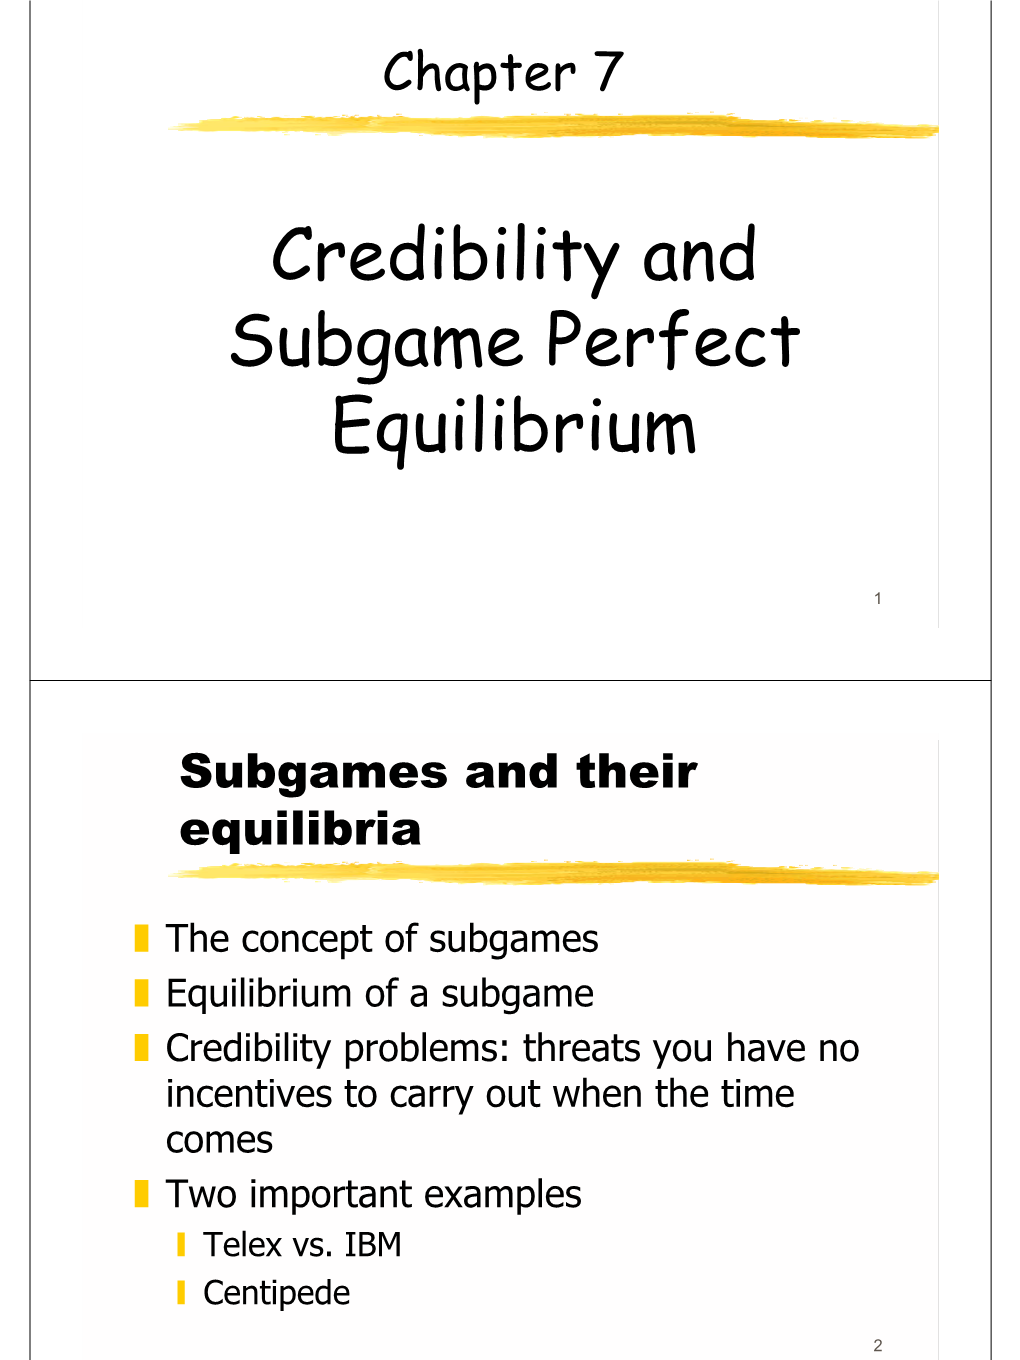 Credibility and Subgame Perfect Equilibrium